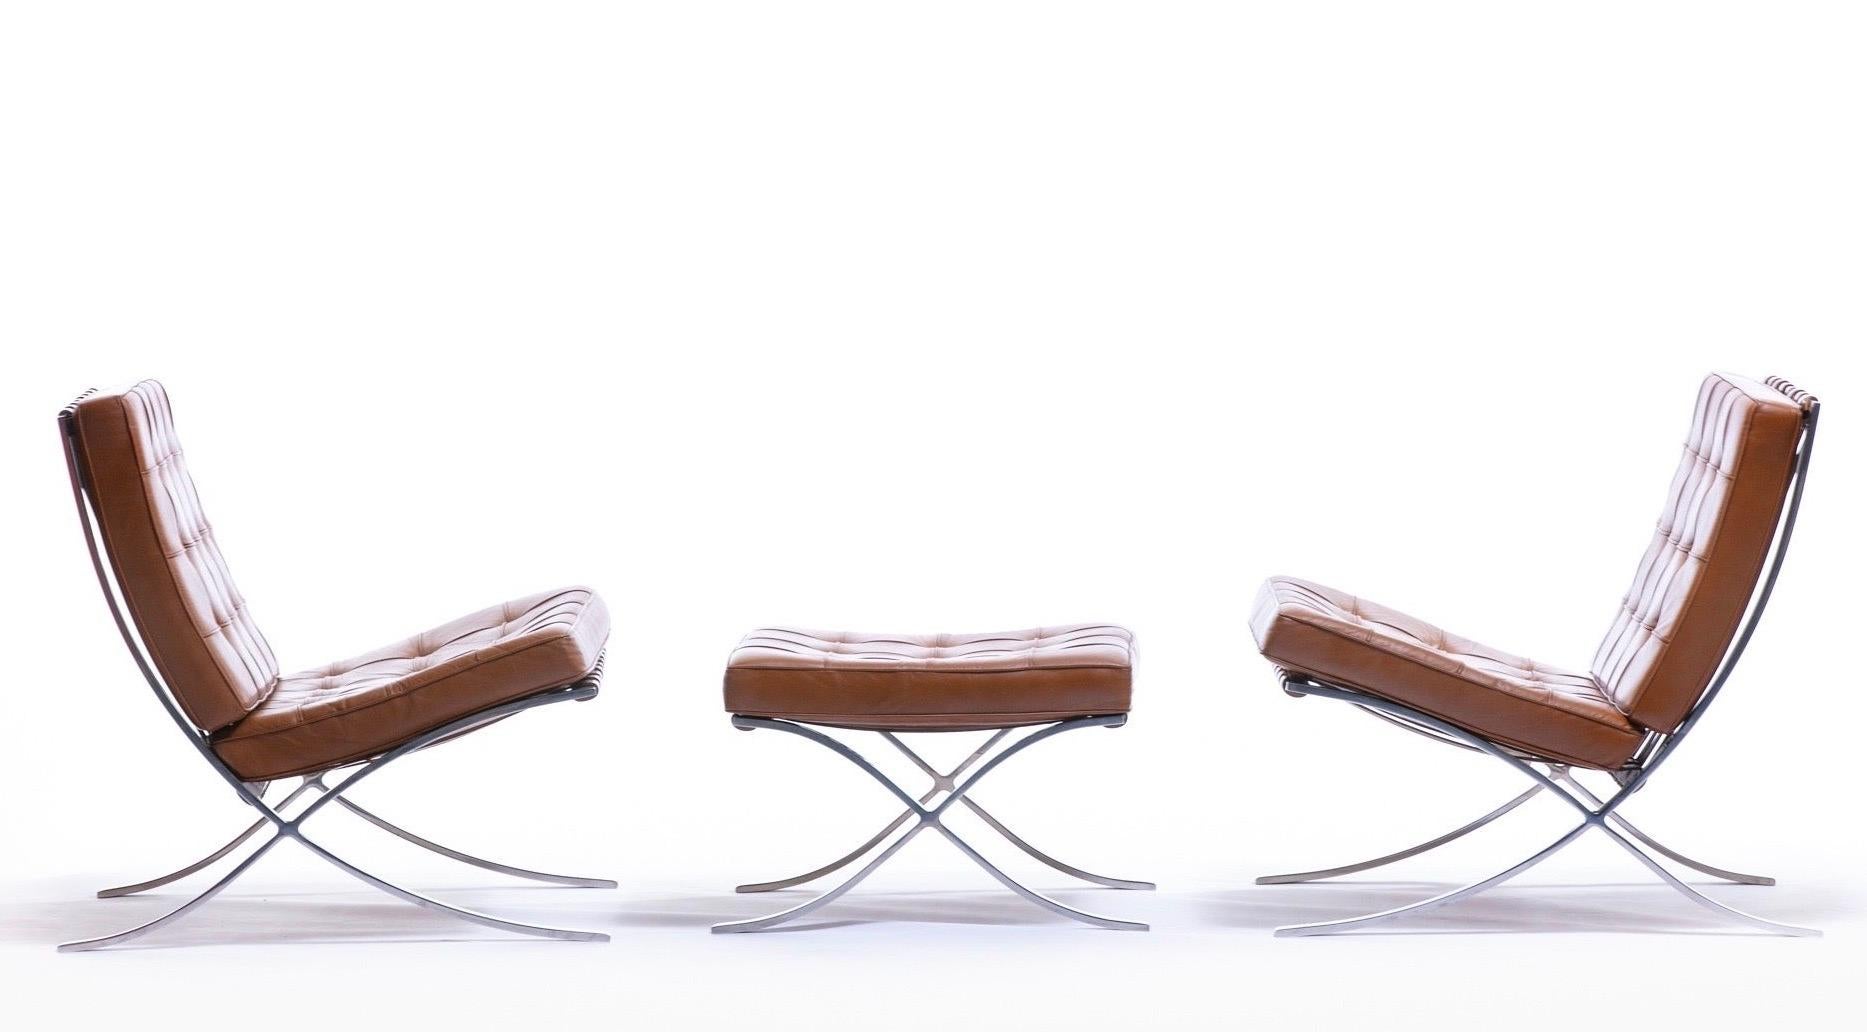 A fantastic pair of labeled and authentic Barcelona lounge chairs and single Barcelona ottoman by Ludwig Mies van der Rohe for Knoll International. Originally created to serve as Modernist Throne seating for the King and Queen of Spain in the German